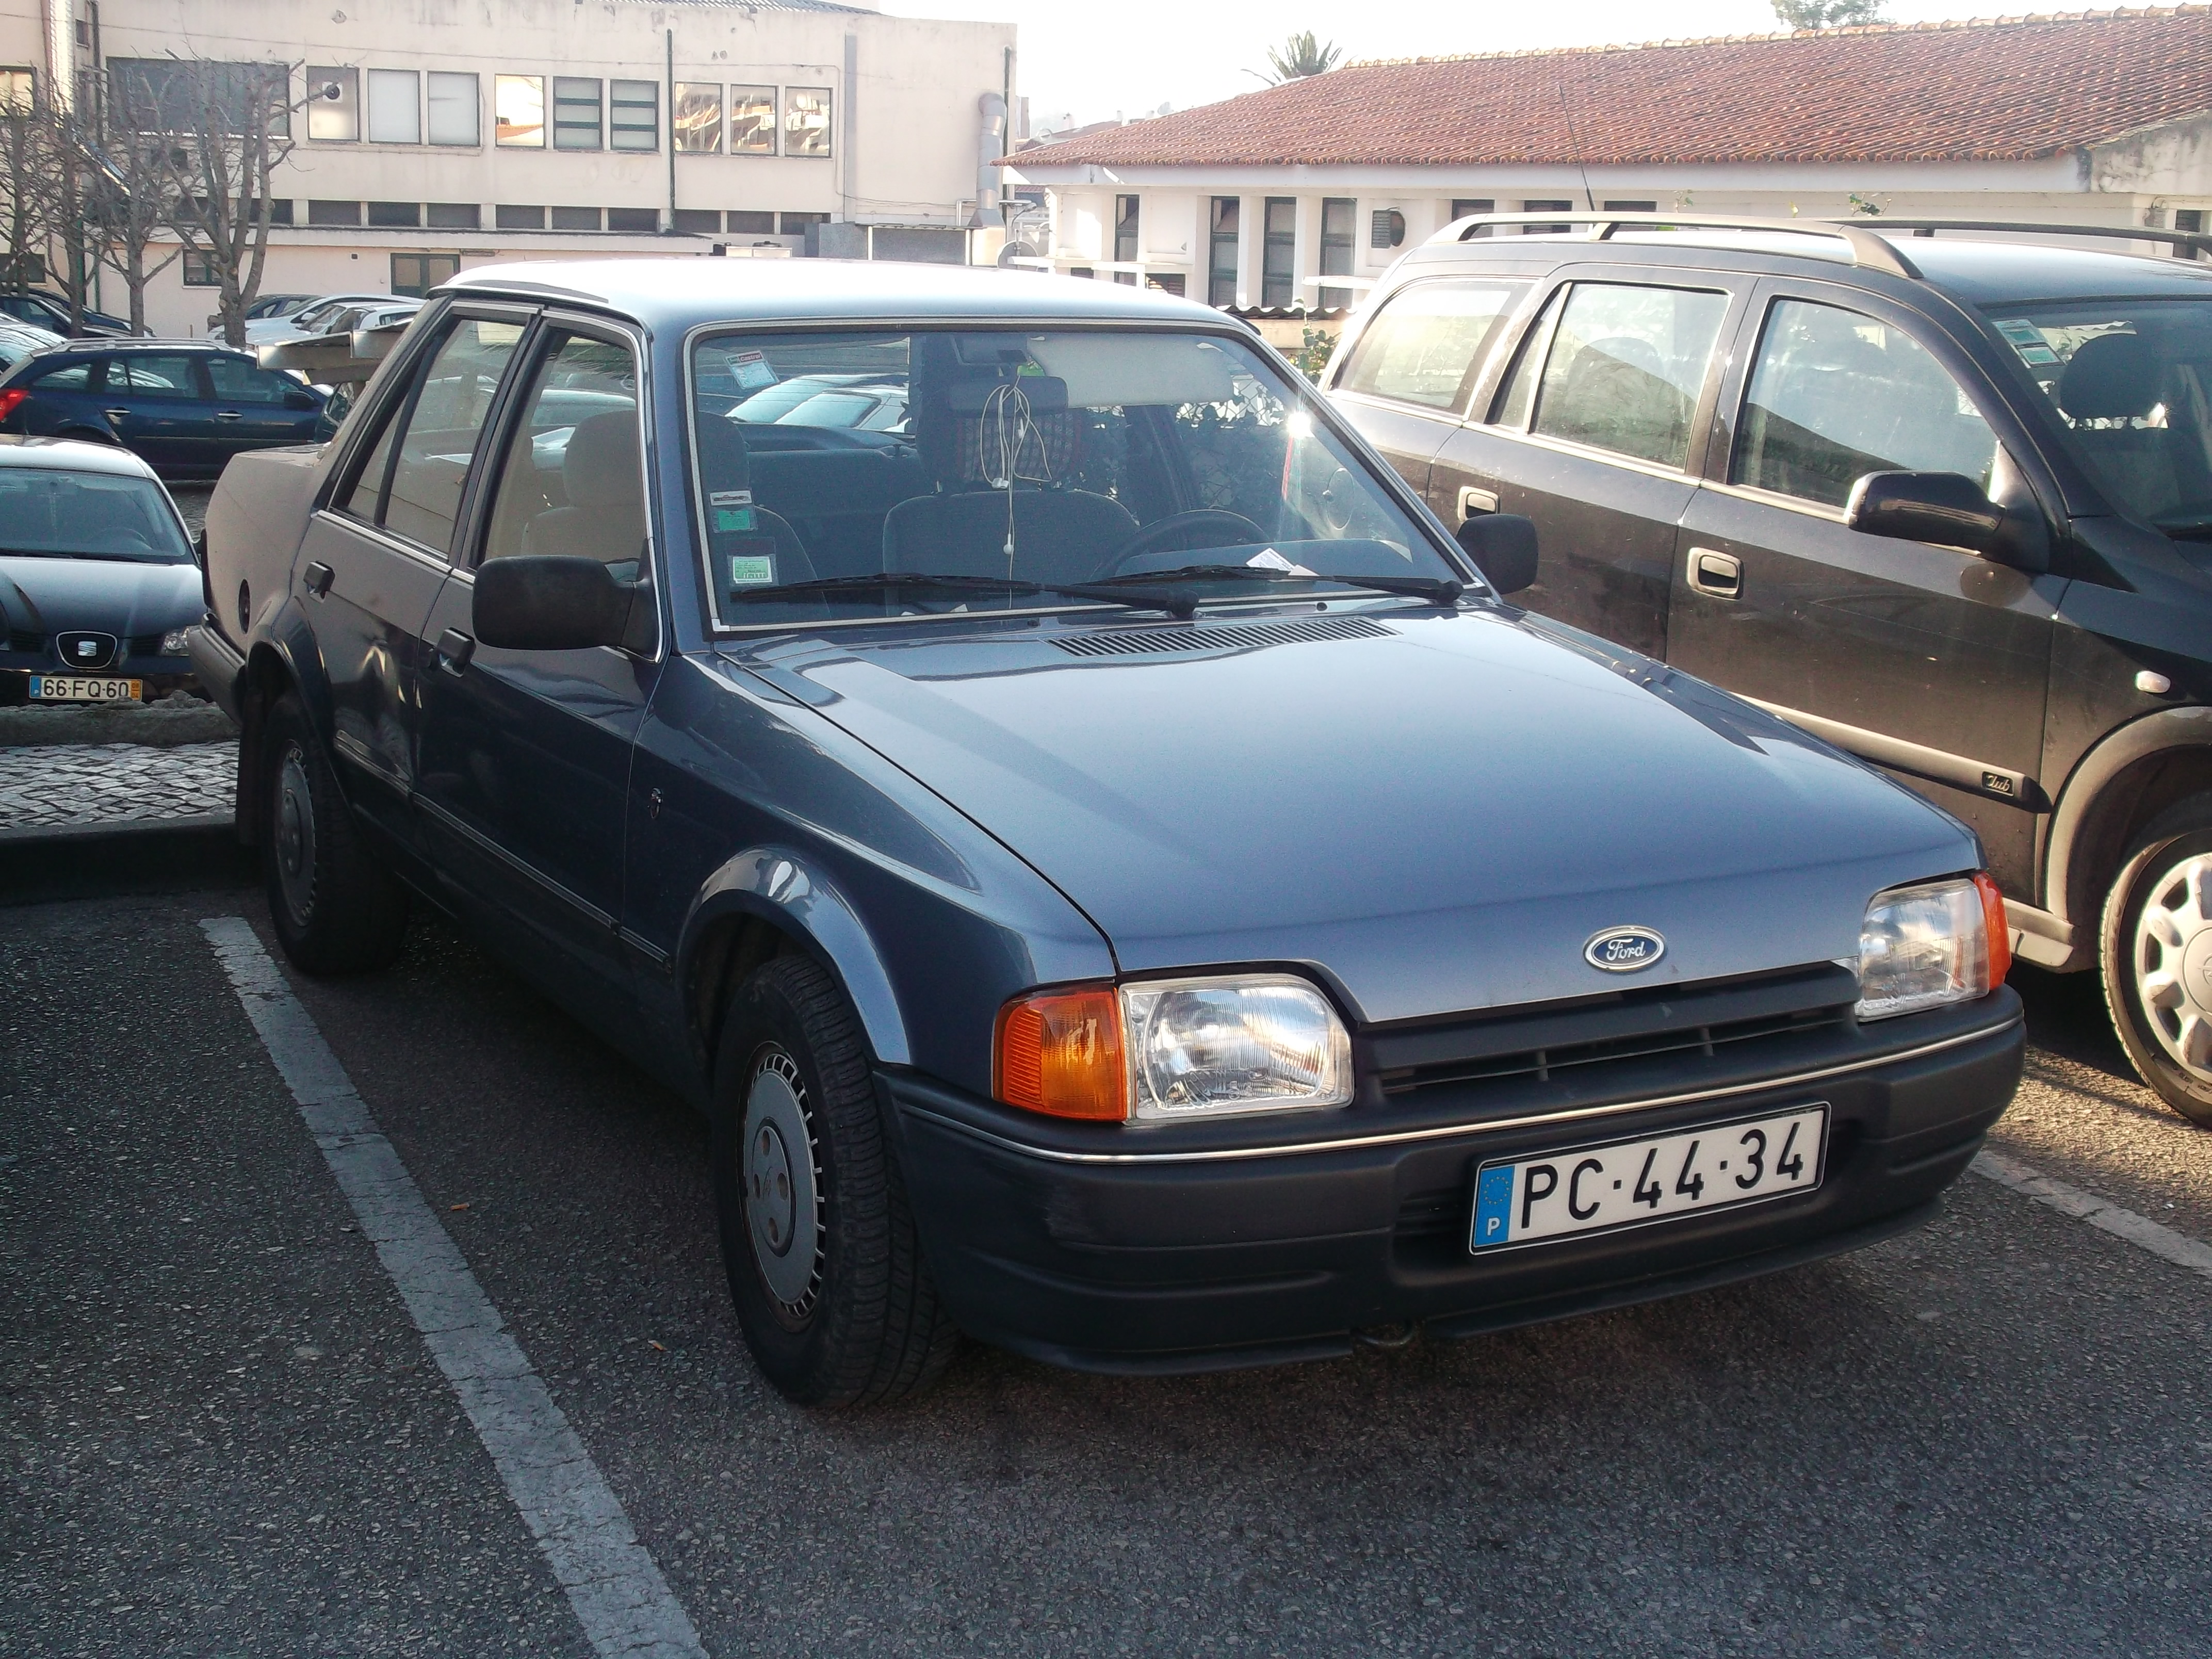 Ford Orion 1.4 Ghia | Flickr - Photo Sharing!